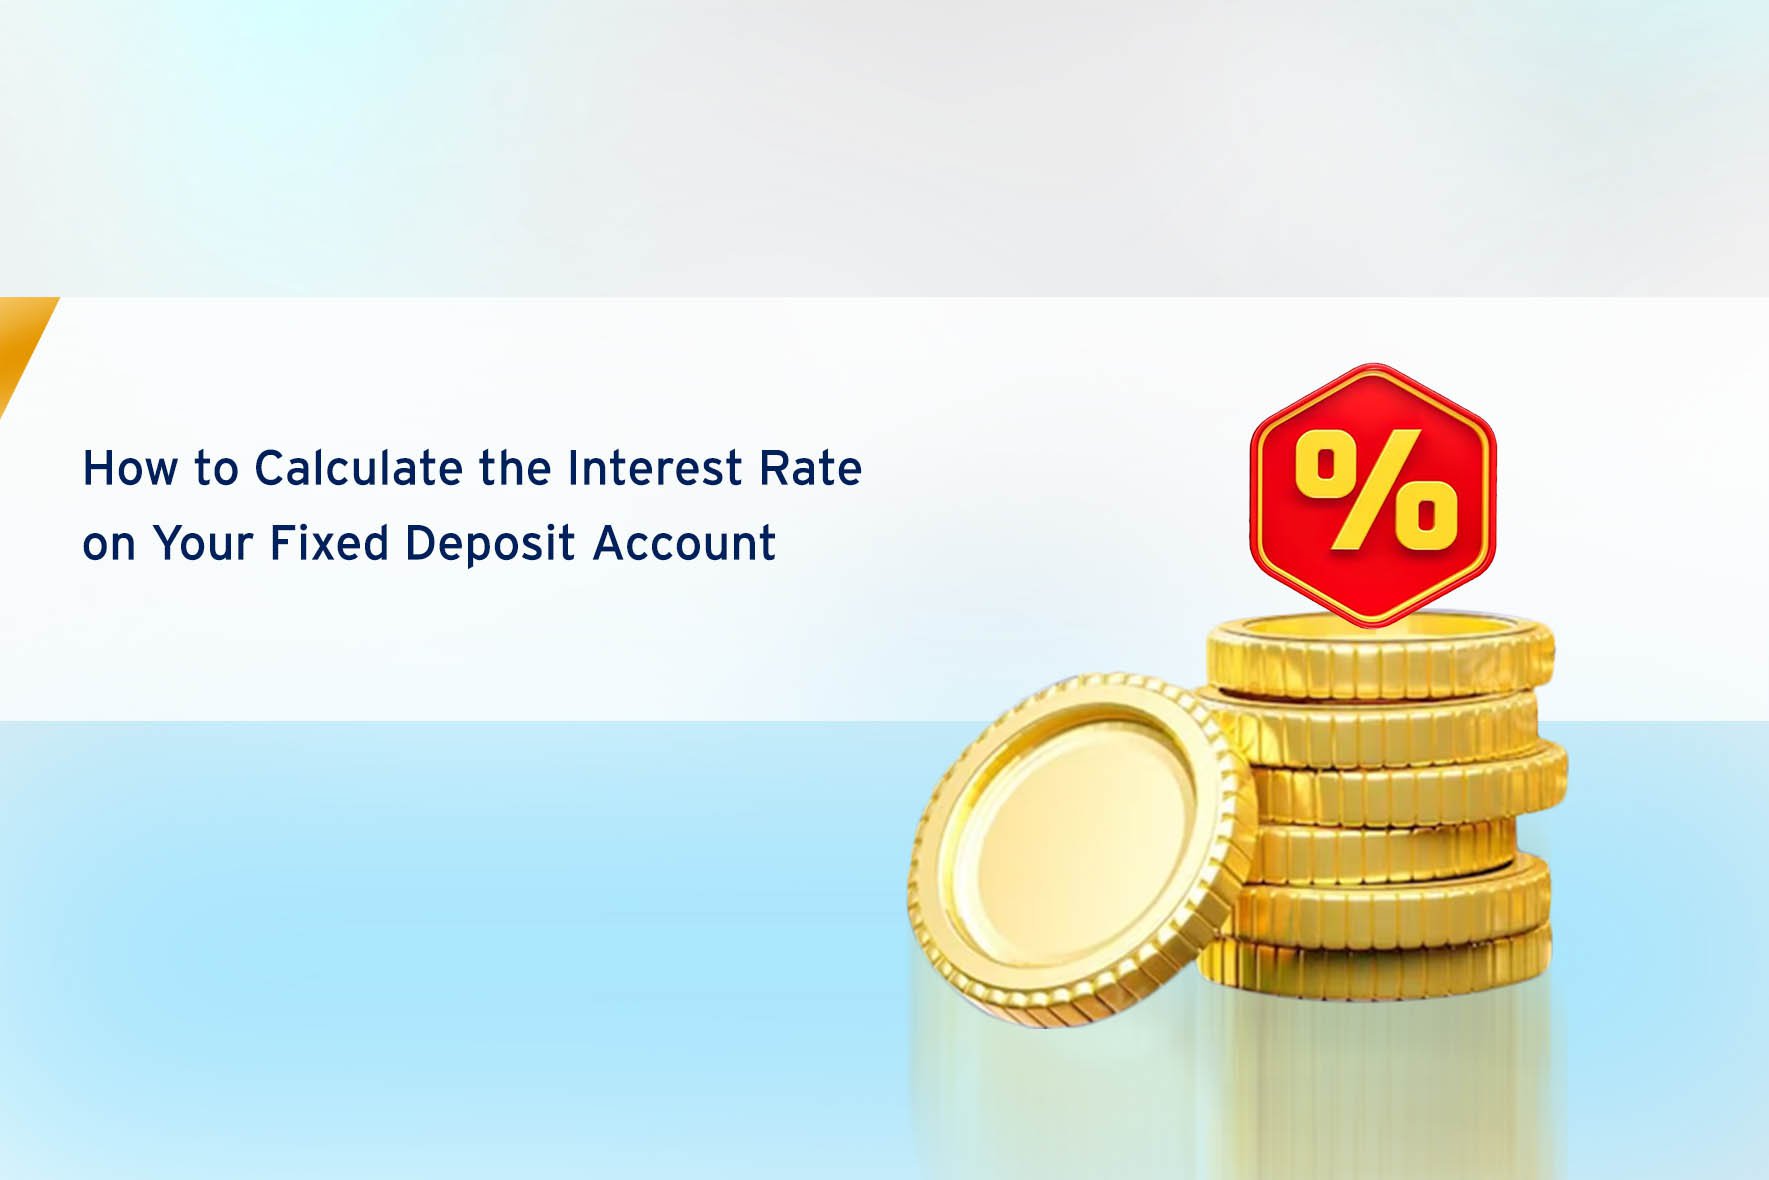 Interest rate on fixed deposit